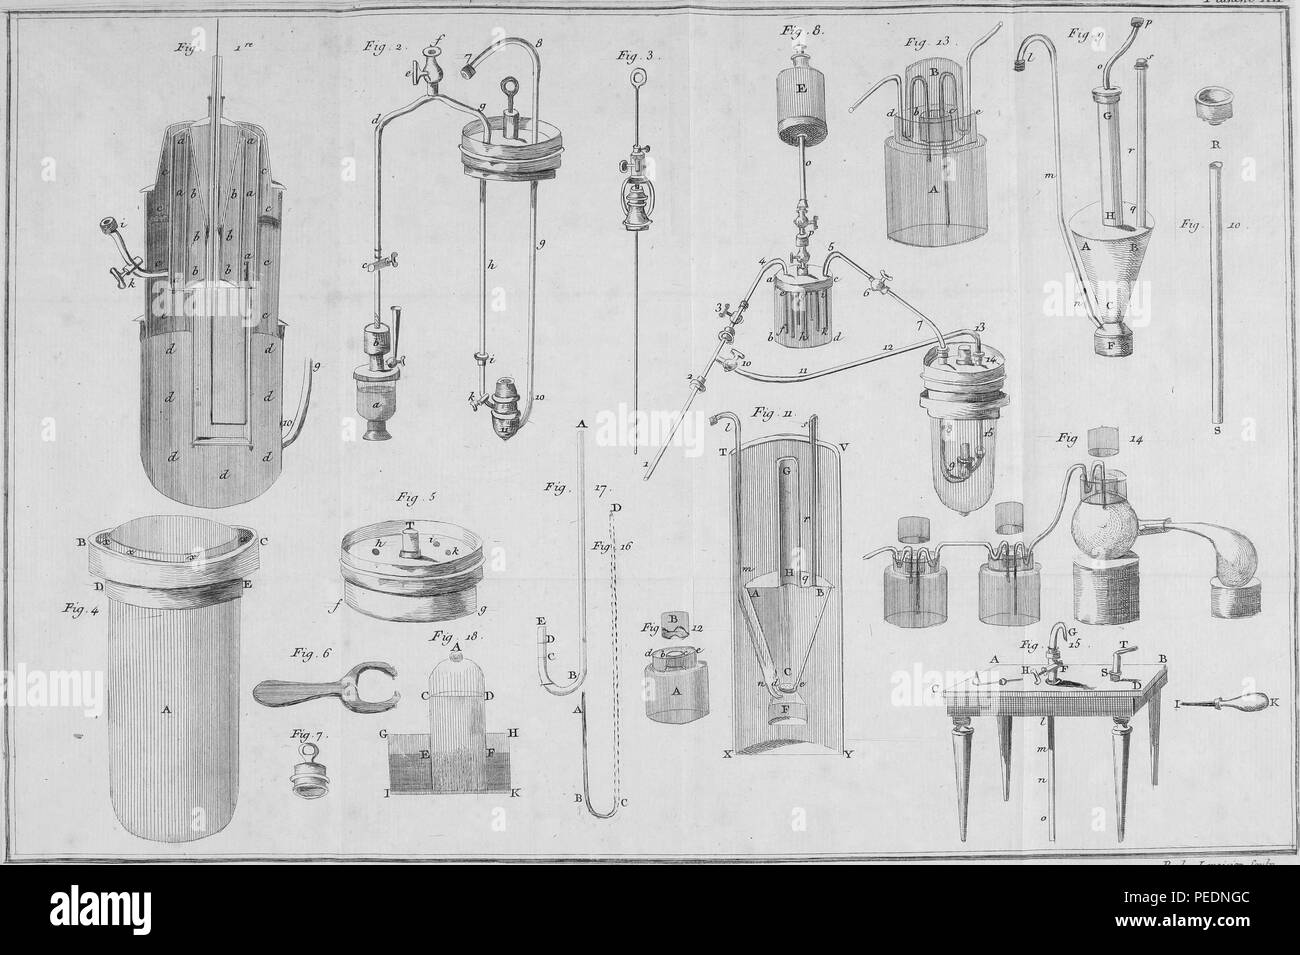 Black and white print illustrating scientific laboratory apparatus, from Lavoisier's 'Traite elementaire de Chimie' or 'Elementary Treatise of Chemistry', 1789. Courtesy Internet Archive. () Stock Photo